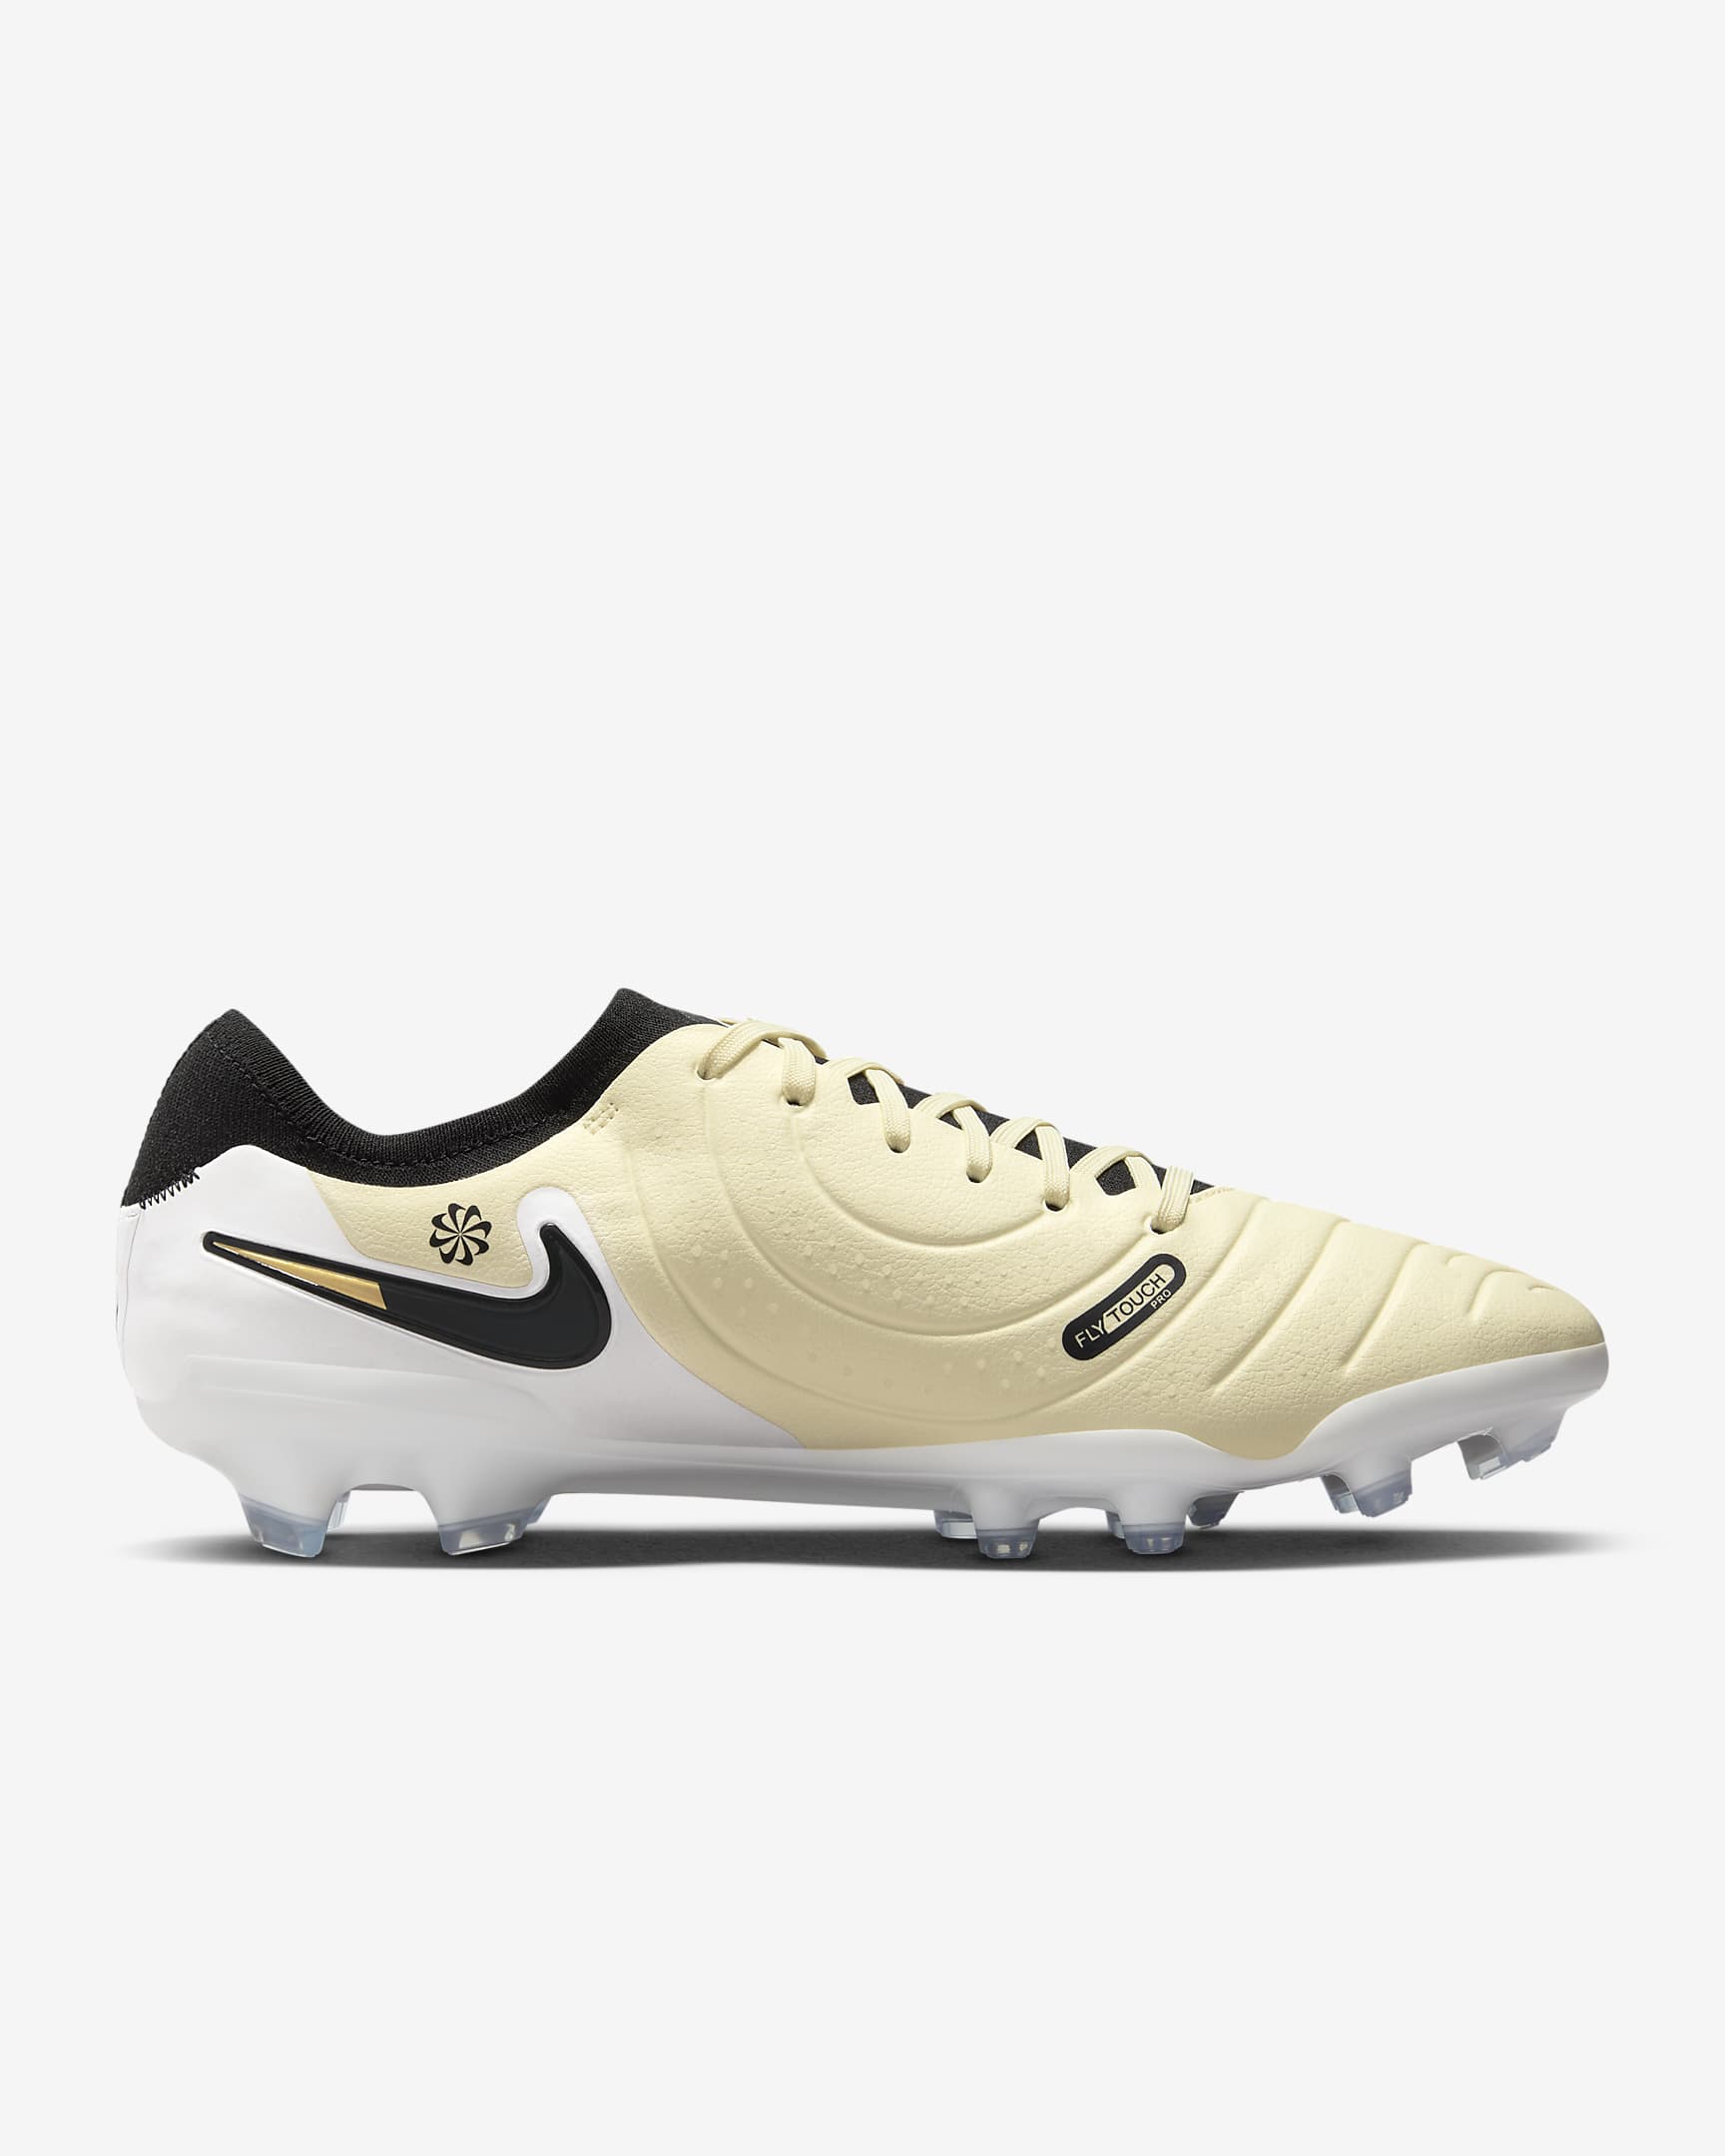 Nike Tiempo Legend 10 Pro Firm-Ground Low-Top Soccer Cleats. Nike.com